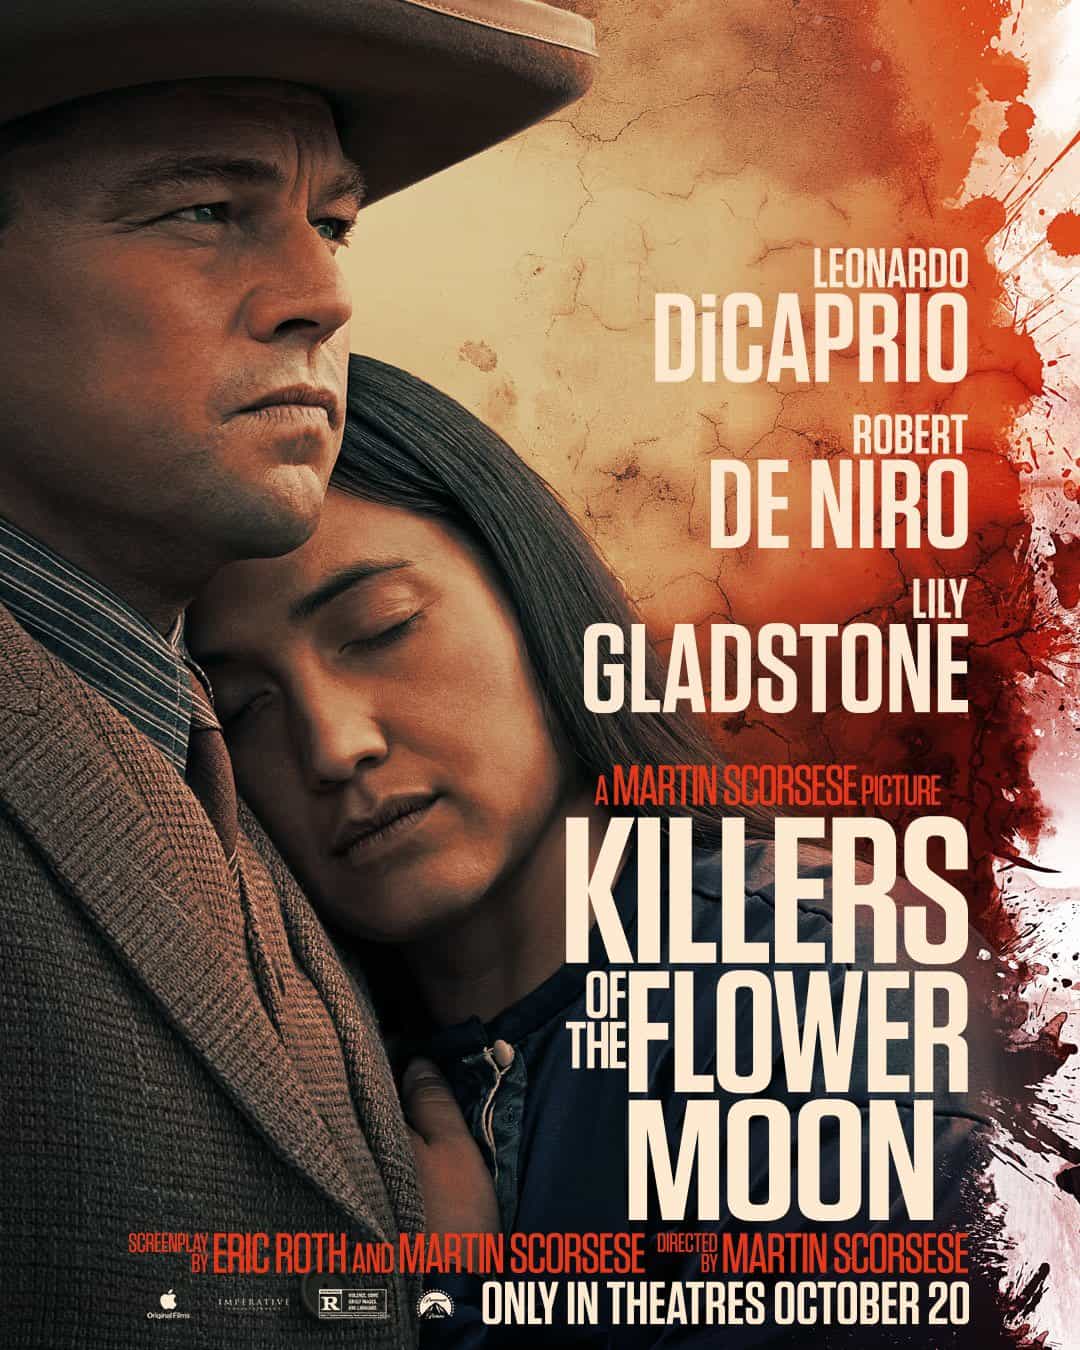 Killers of the Flower Moon is given a 15 age rating in the UK for strong violence, injury detail, racism